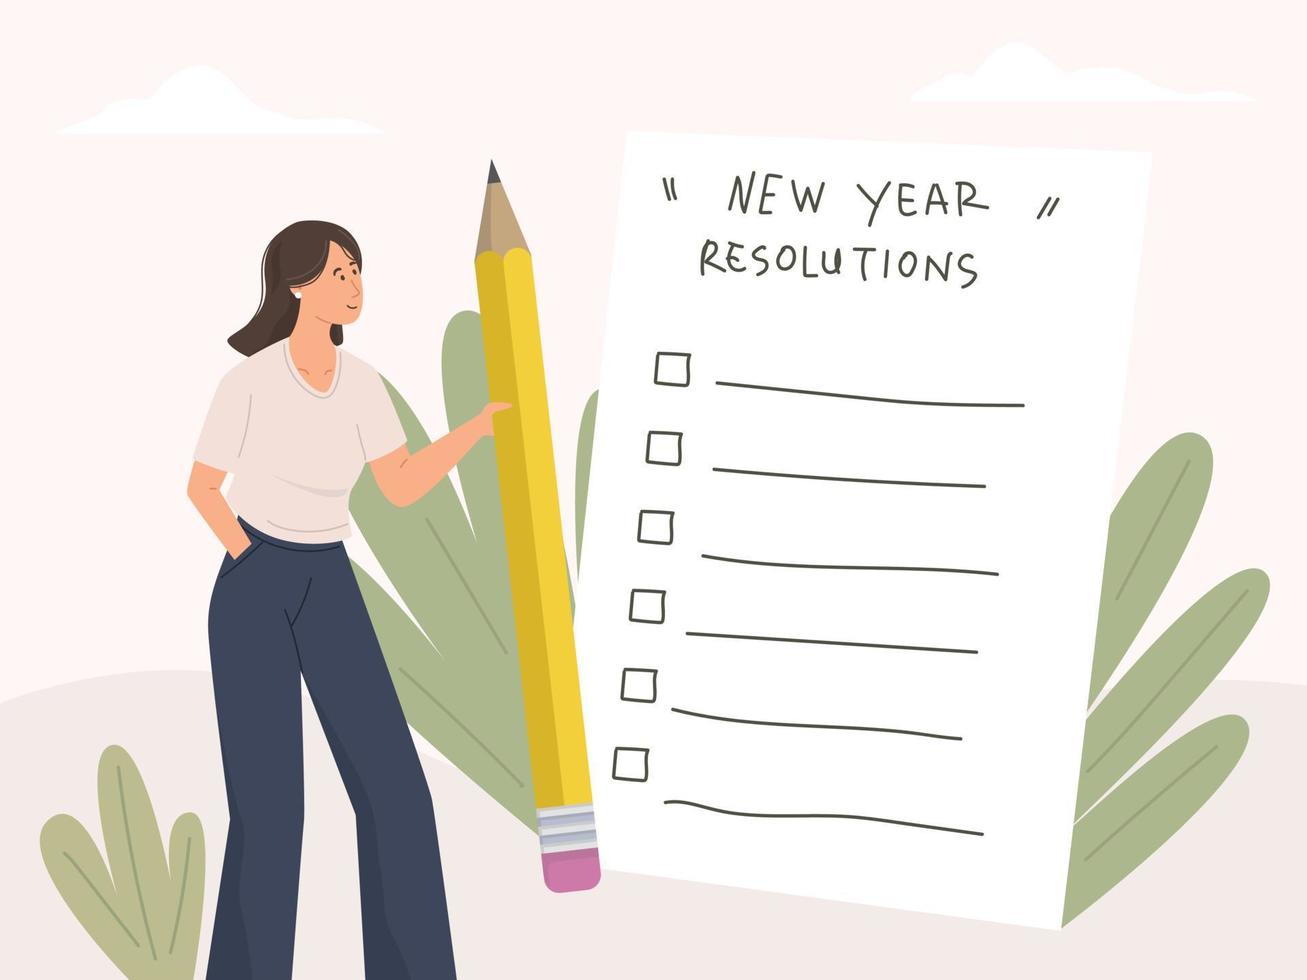 New year resolutions concept illustration vector